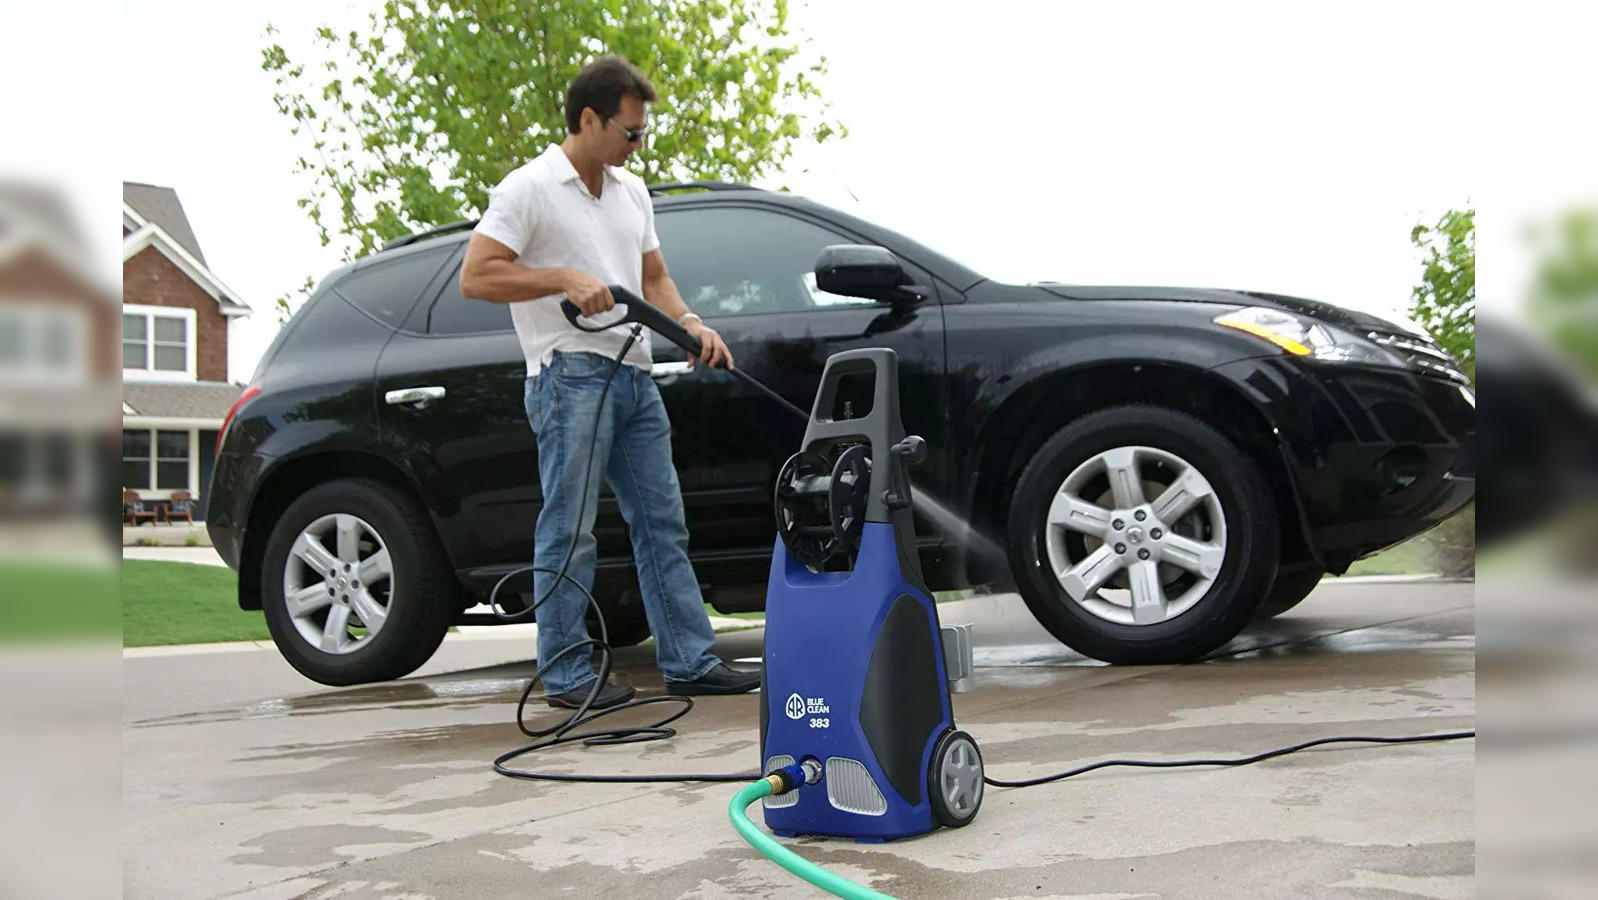 Pressure Washers: Best pressure washers for effortless car and